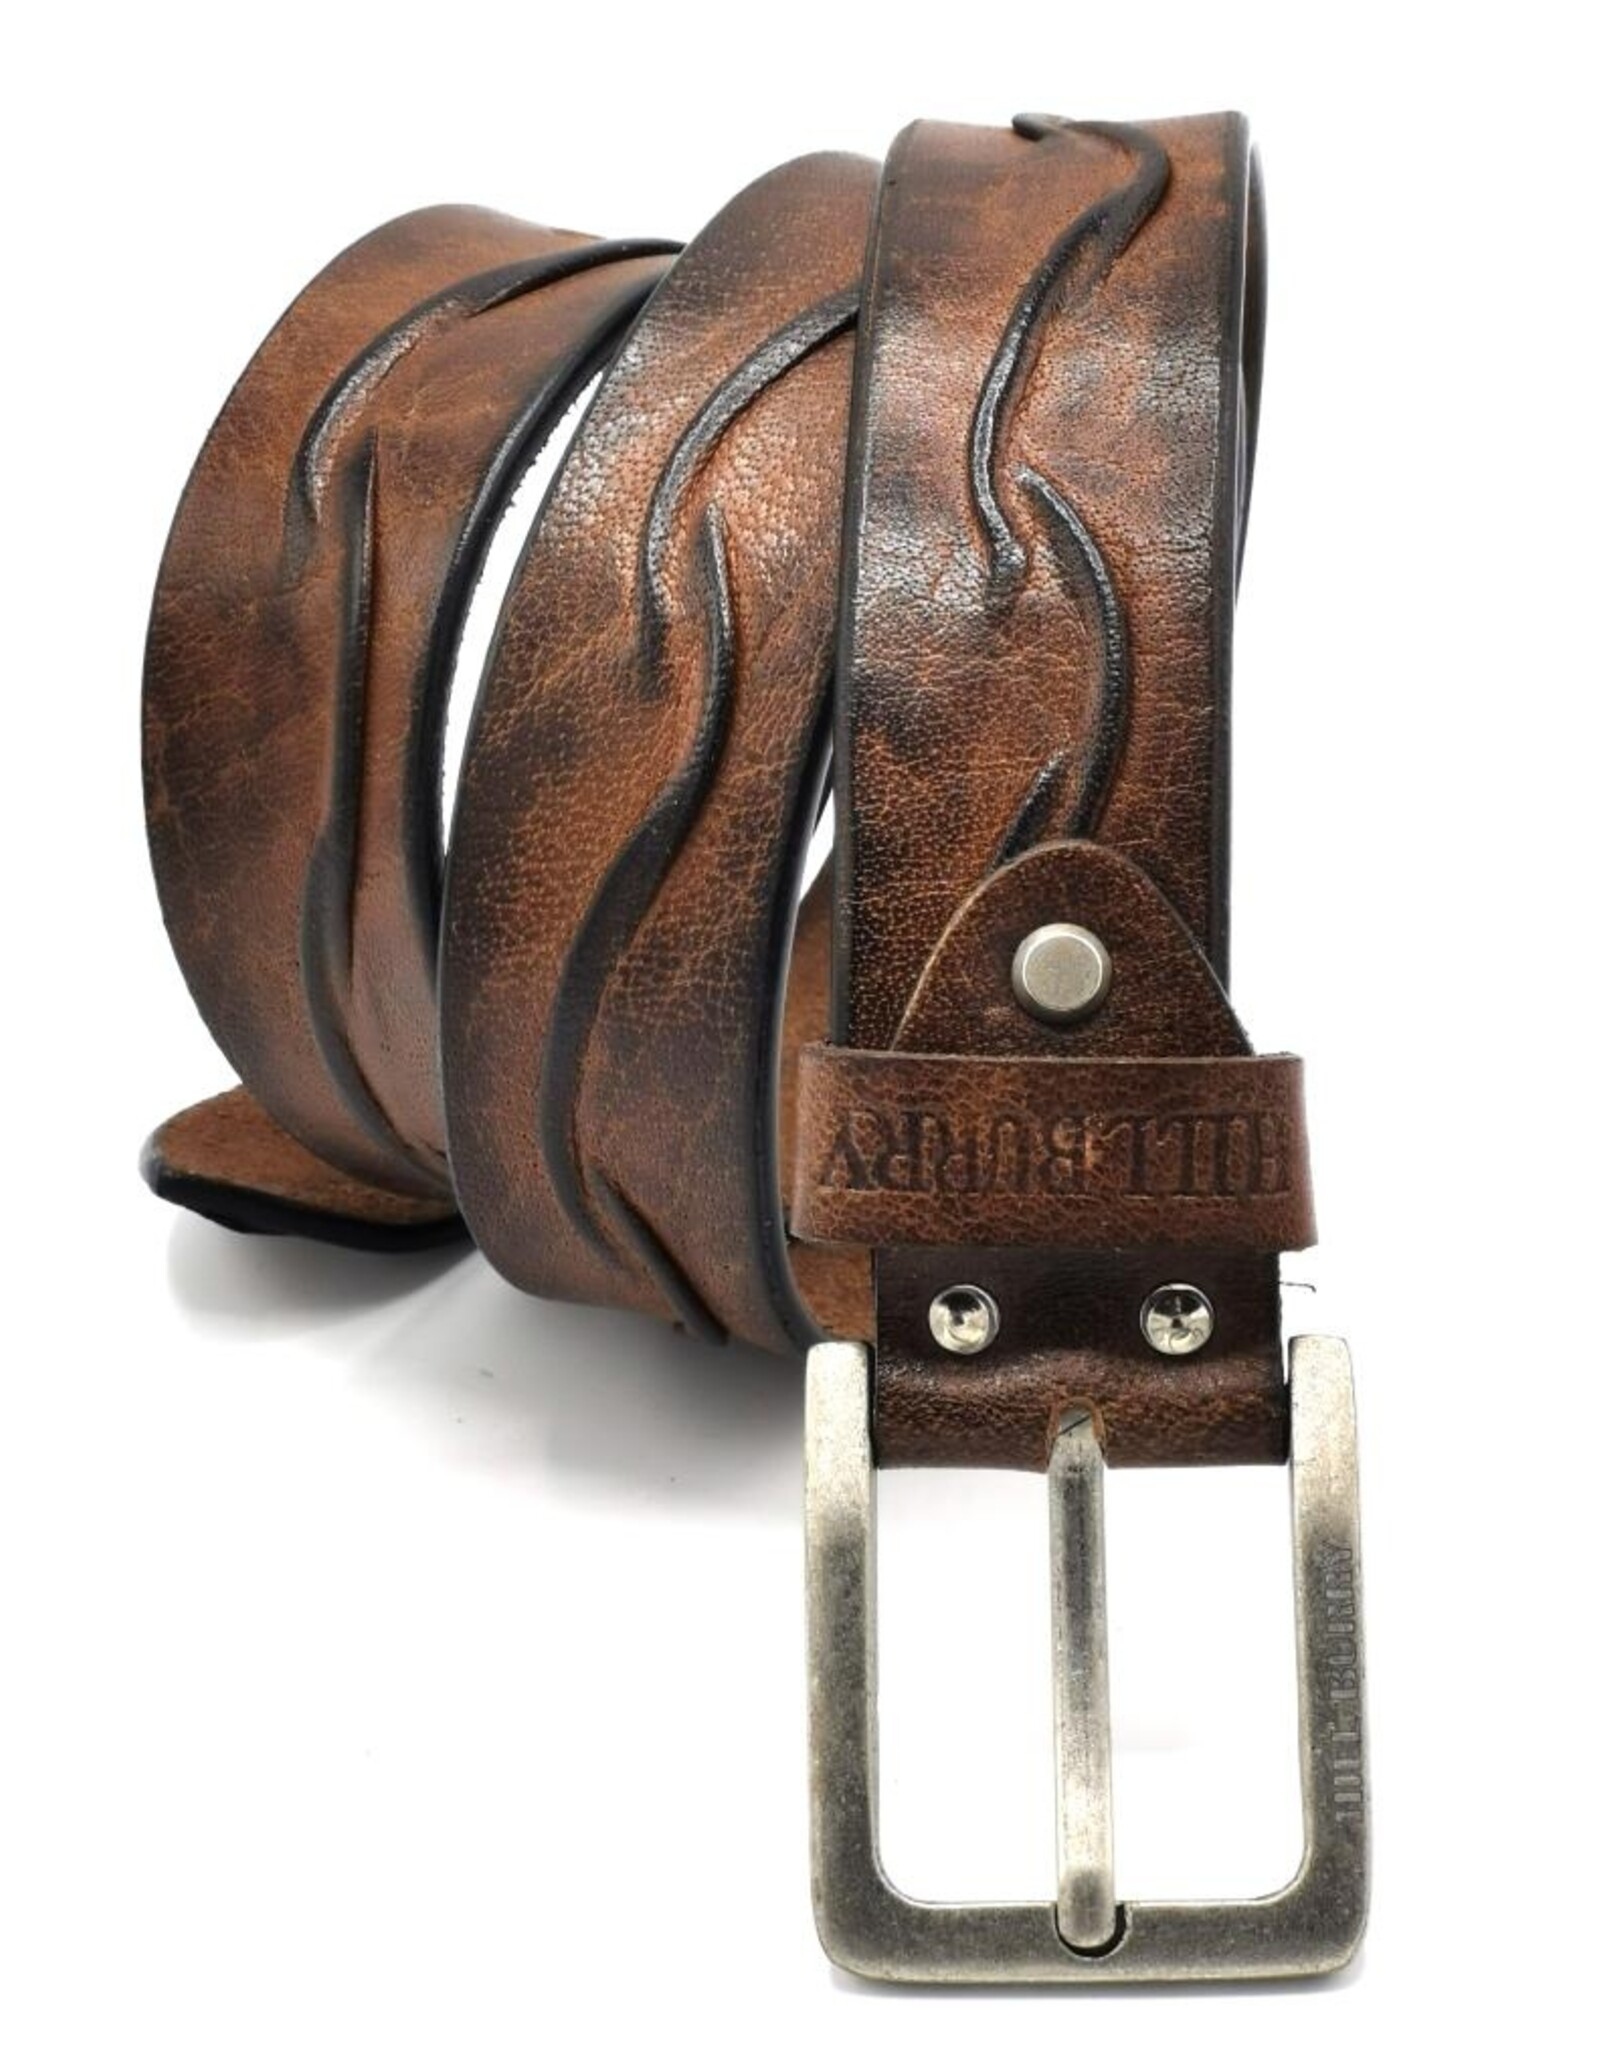 HillBurry Leather belts - HillBurry Leather belt  "Waves", solid leather